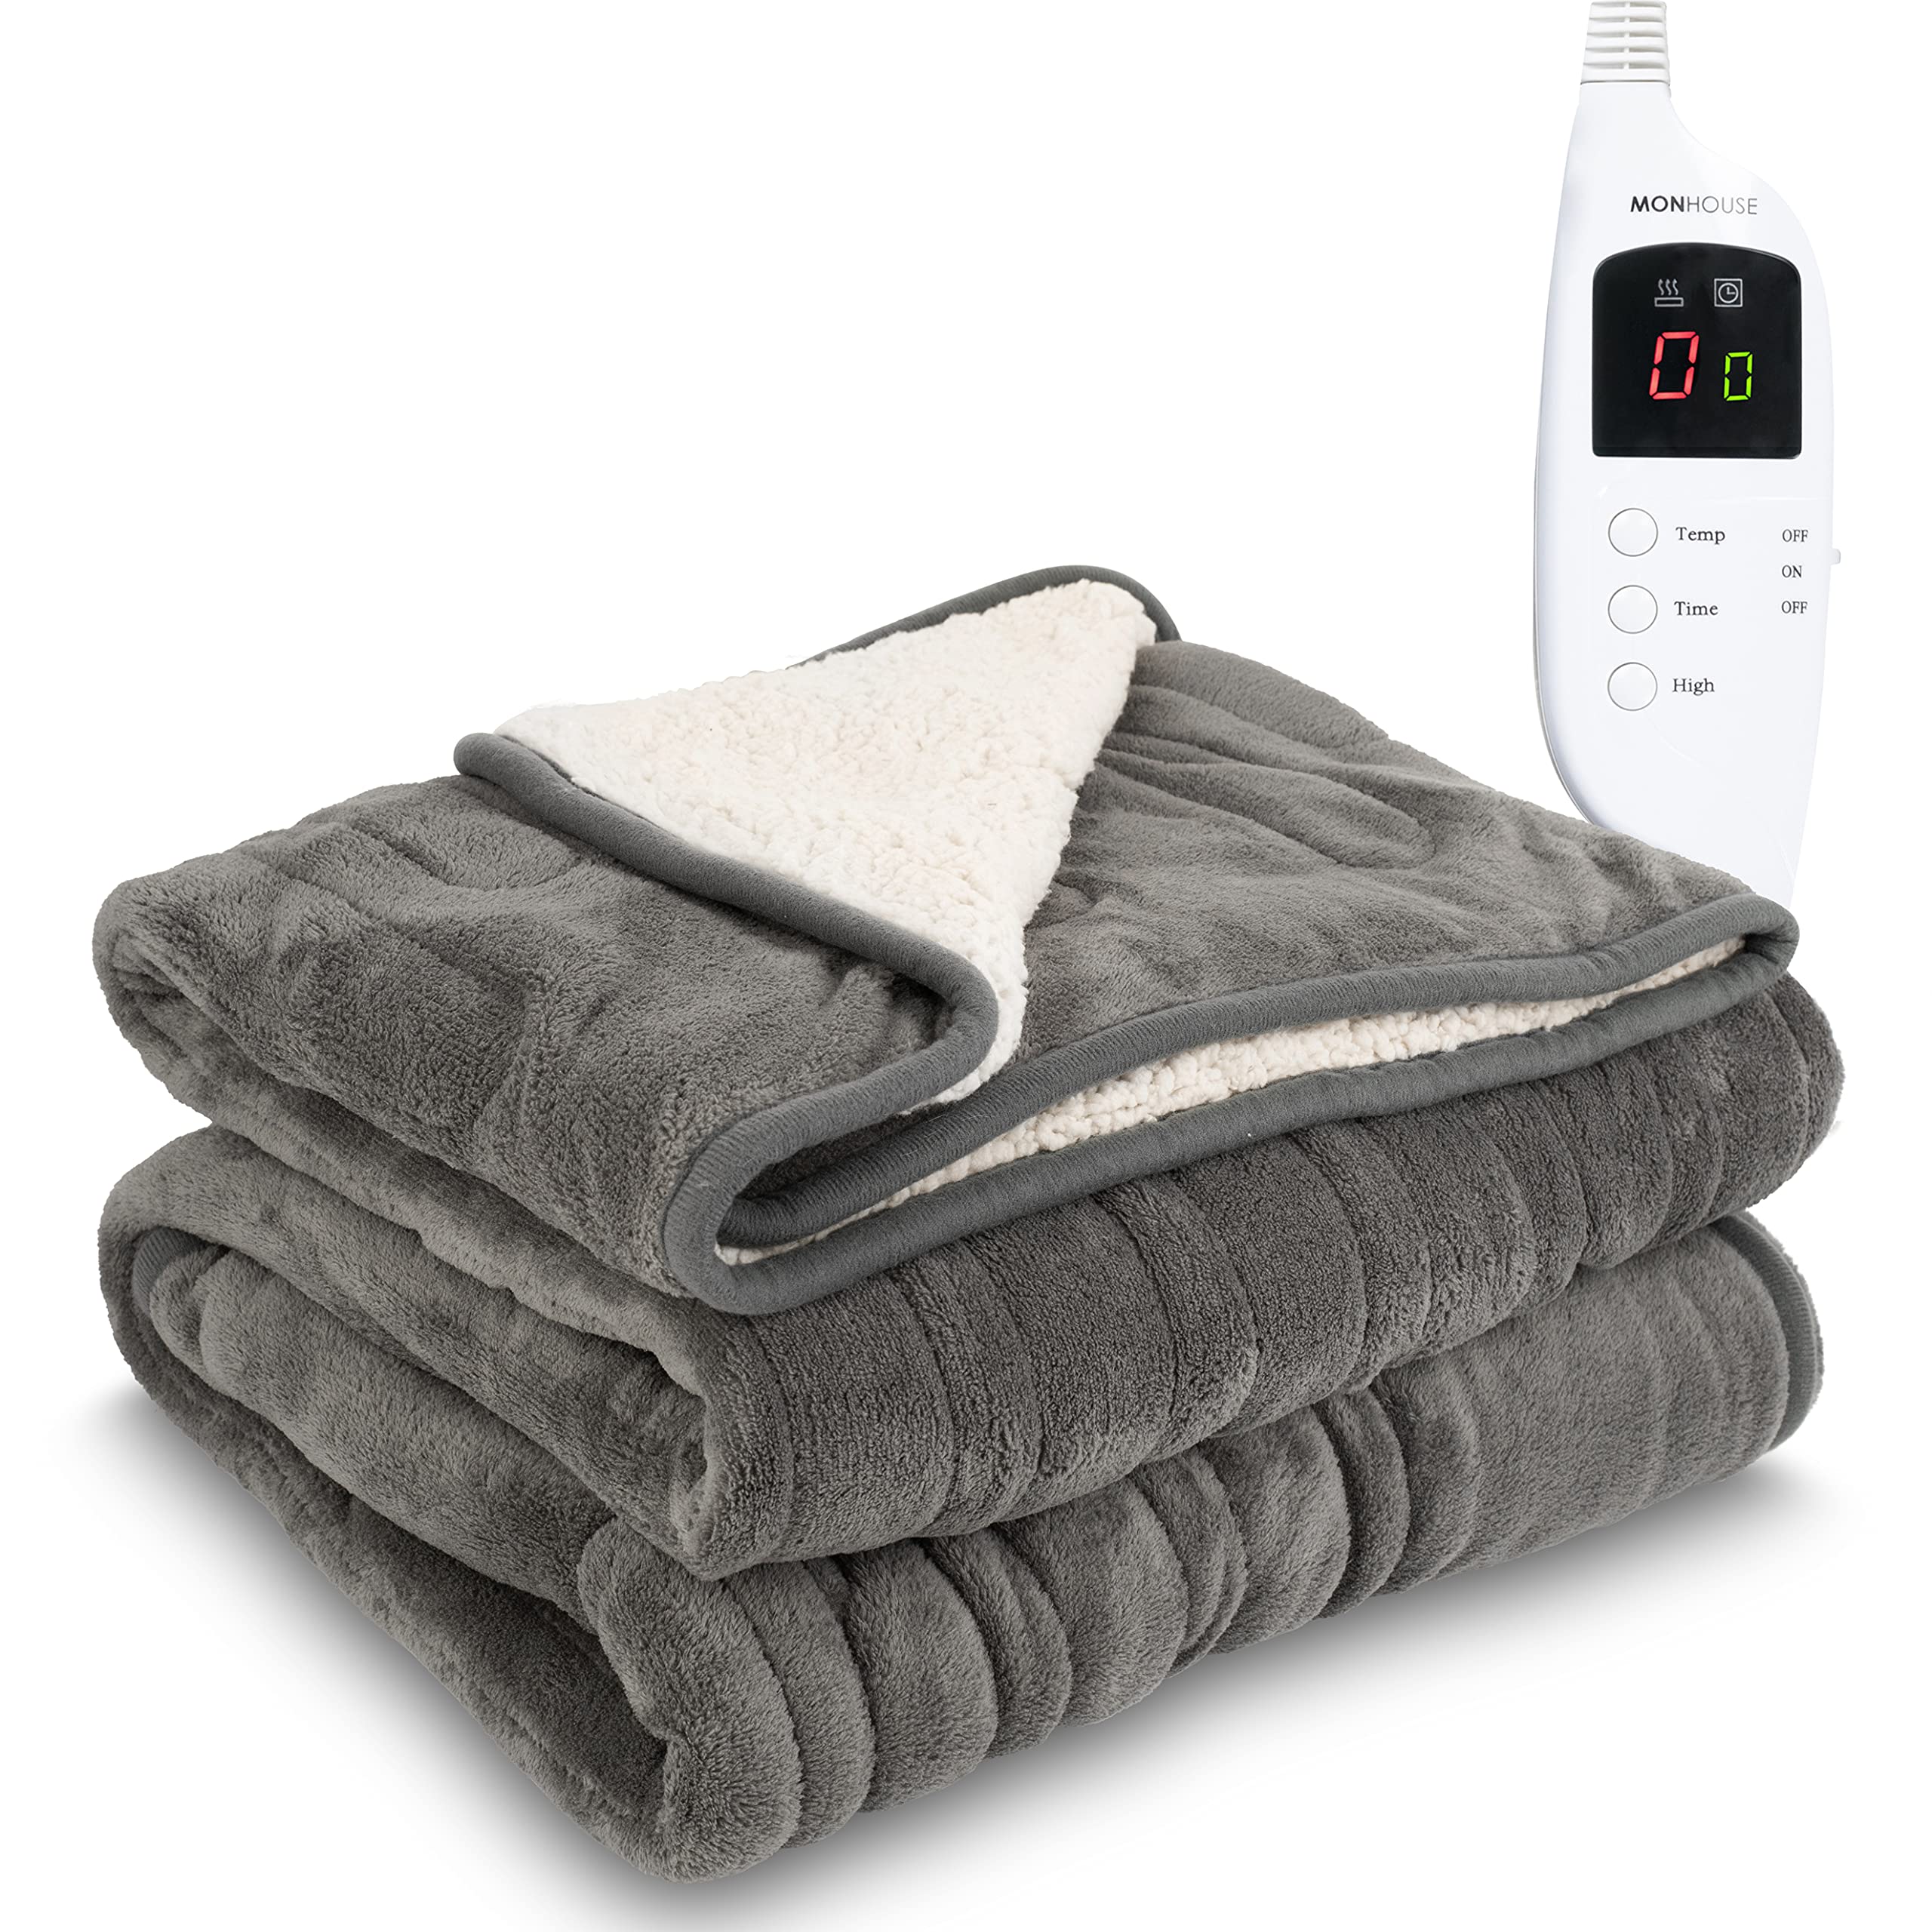 MONHOUSE Heated Throw - Electric Blanket - Digital Controller - Timer up to 9 hours, 9 Heat Settings, Auto Shutoff - Machine Washable - Double 150X200cm - GREY SHEARLING